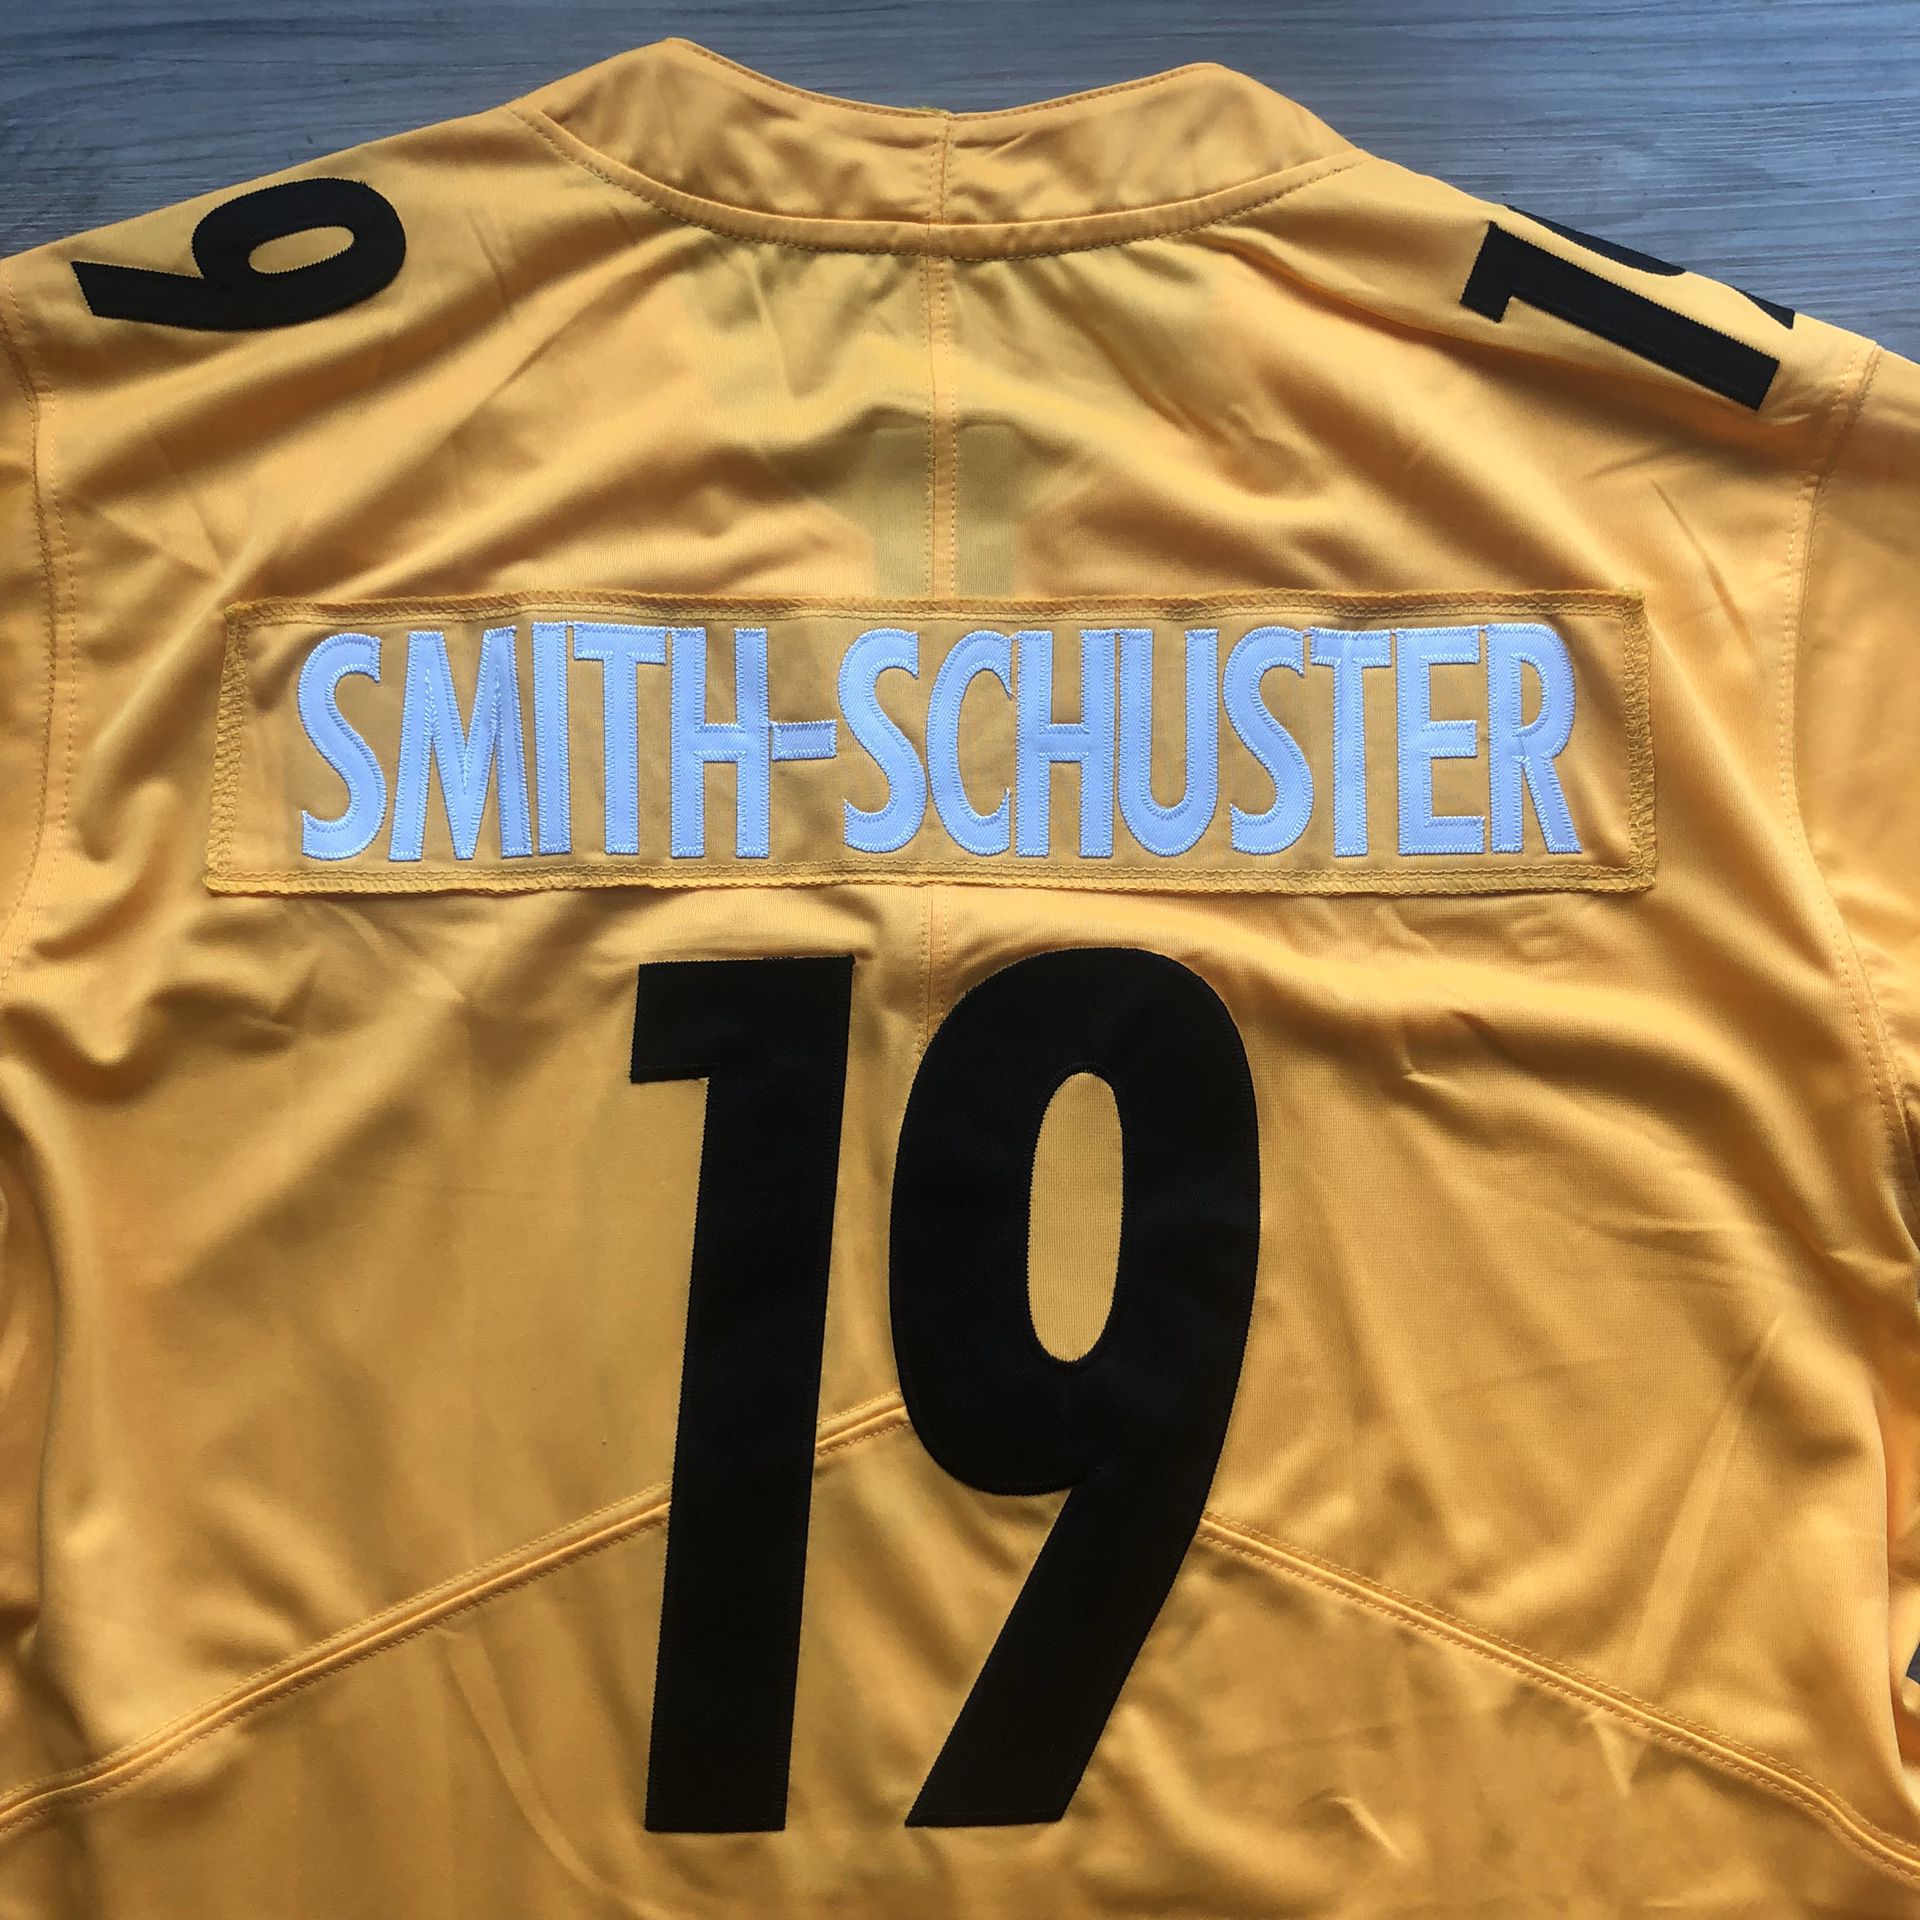 ⭐️ BRAND NEW! ⭐️JuJu Smith-Schuster #19 Steelers Nike Inverted 💯 Logo Jersey + SIZE Large + SHIPS OUT TODAY! 📦💨